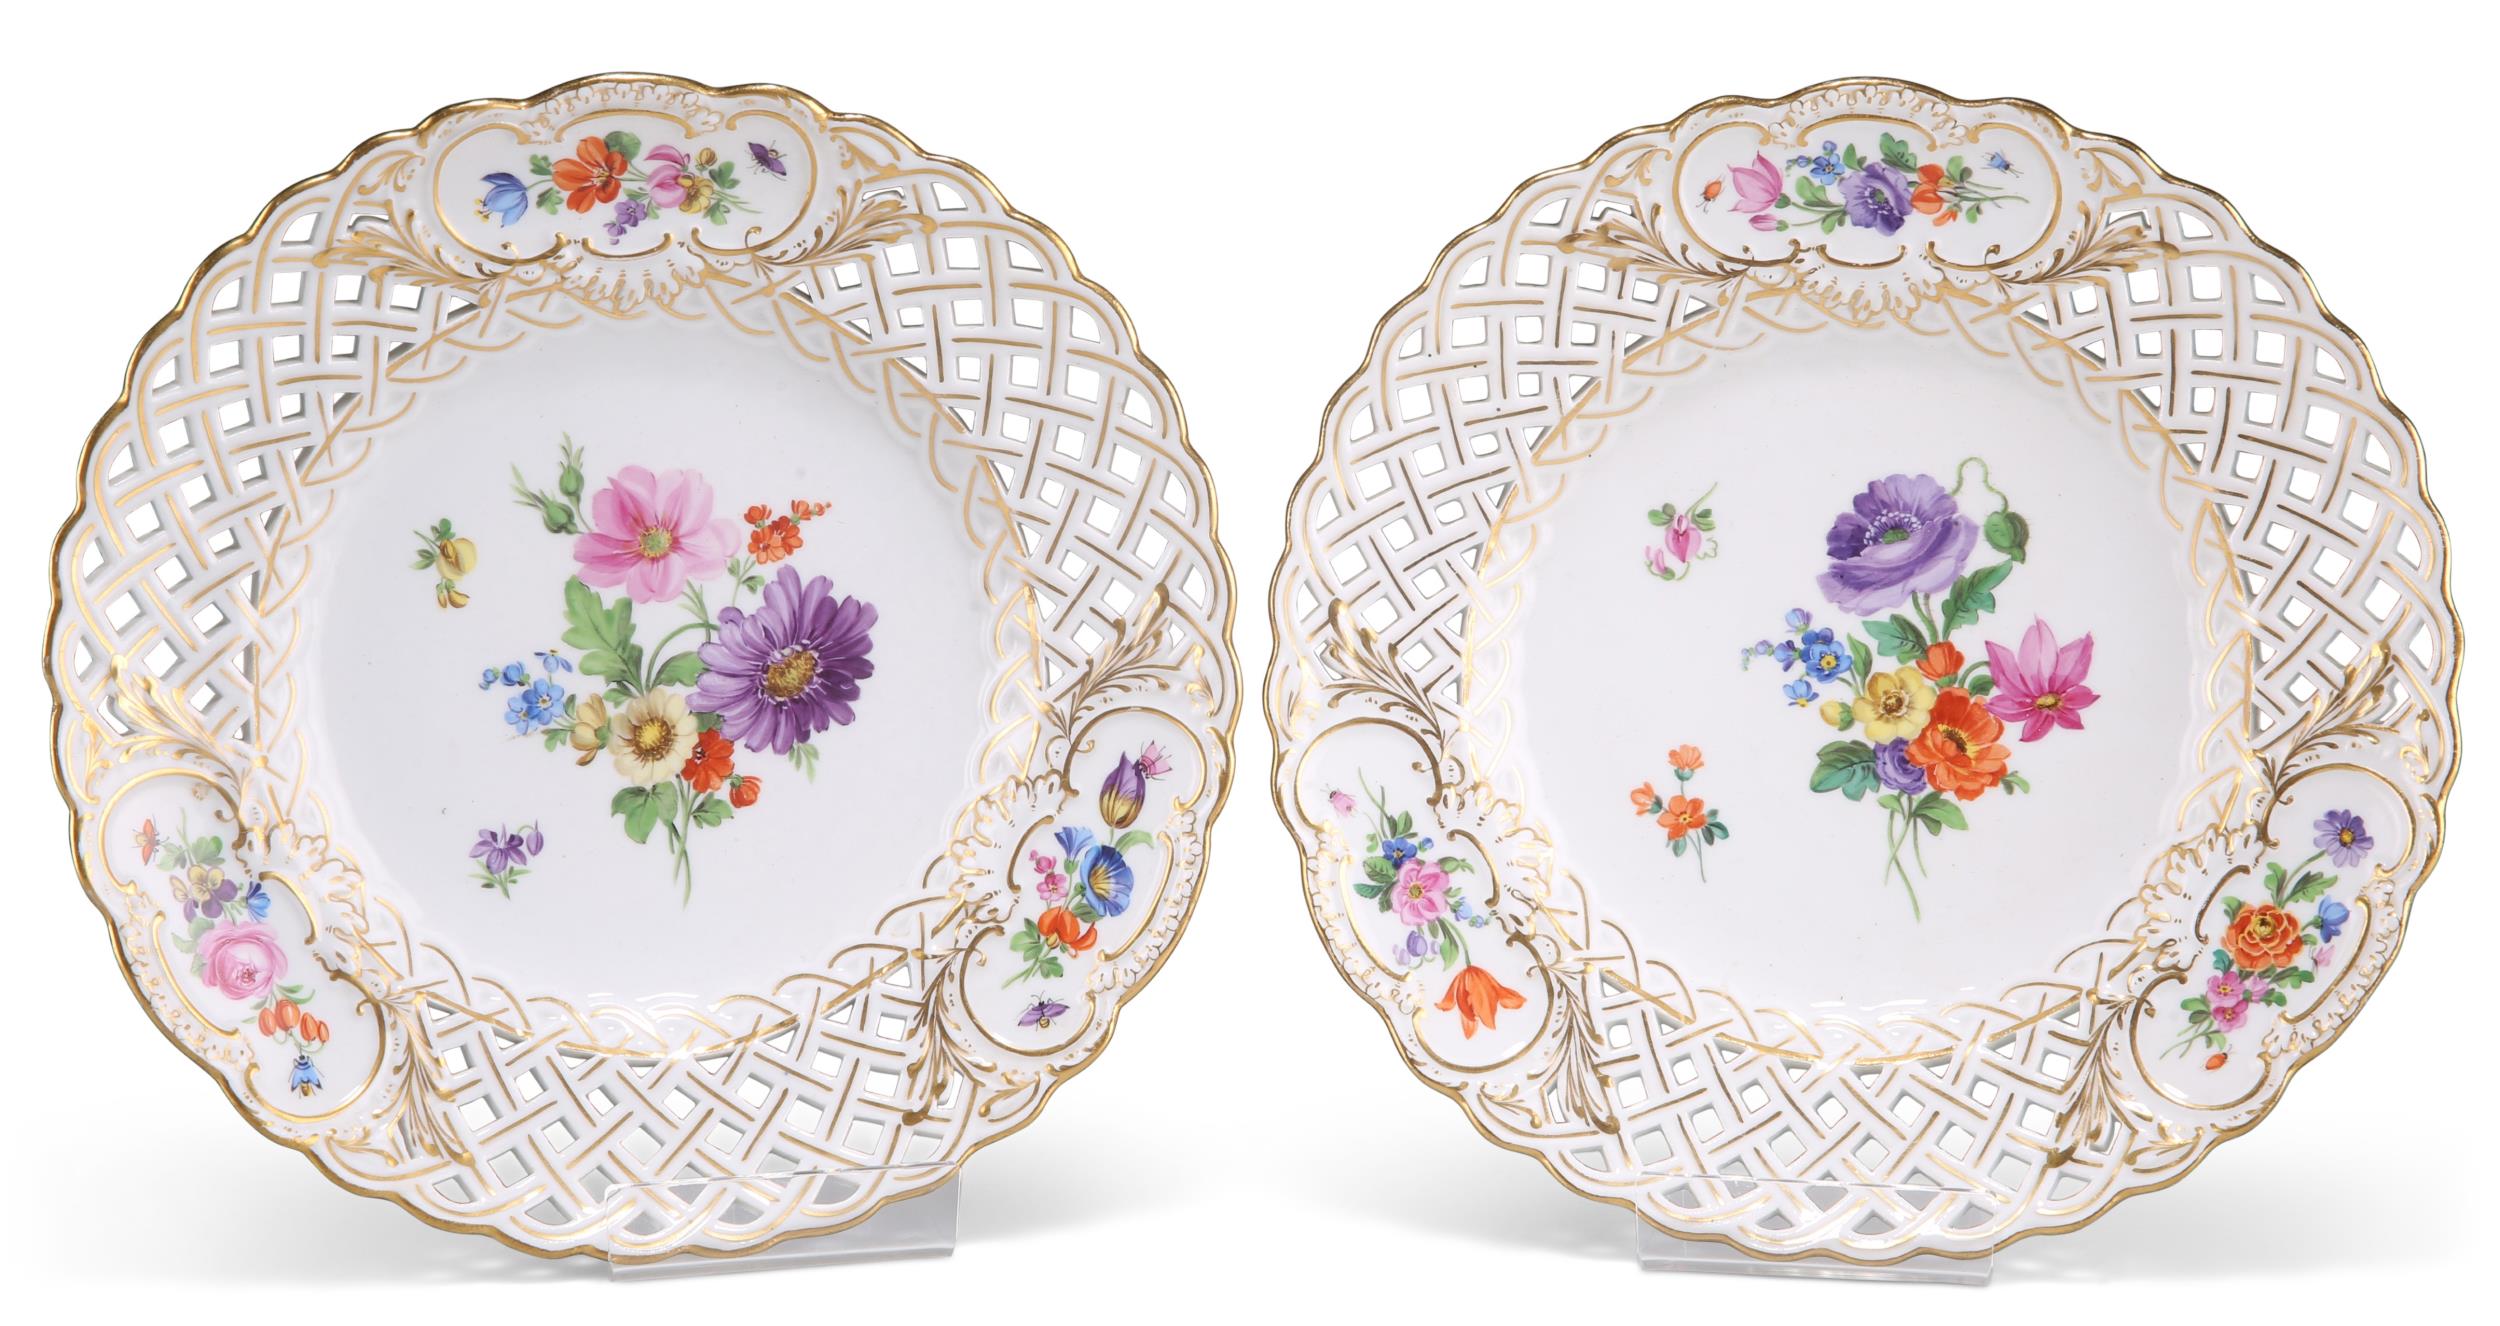 A PAIR OF MEISSEN BOTANICAL PLATES, LATE 19TH CENTURY